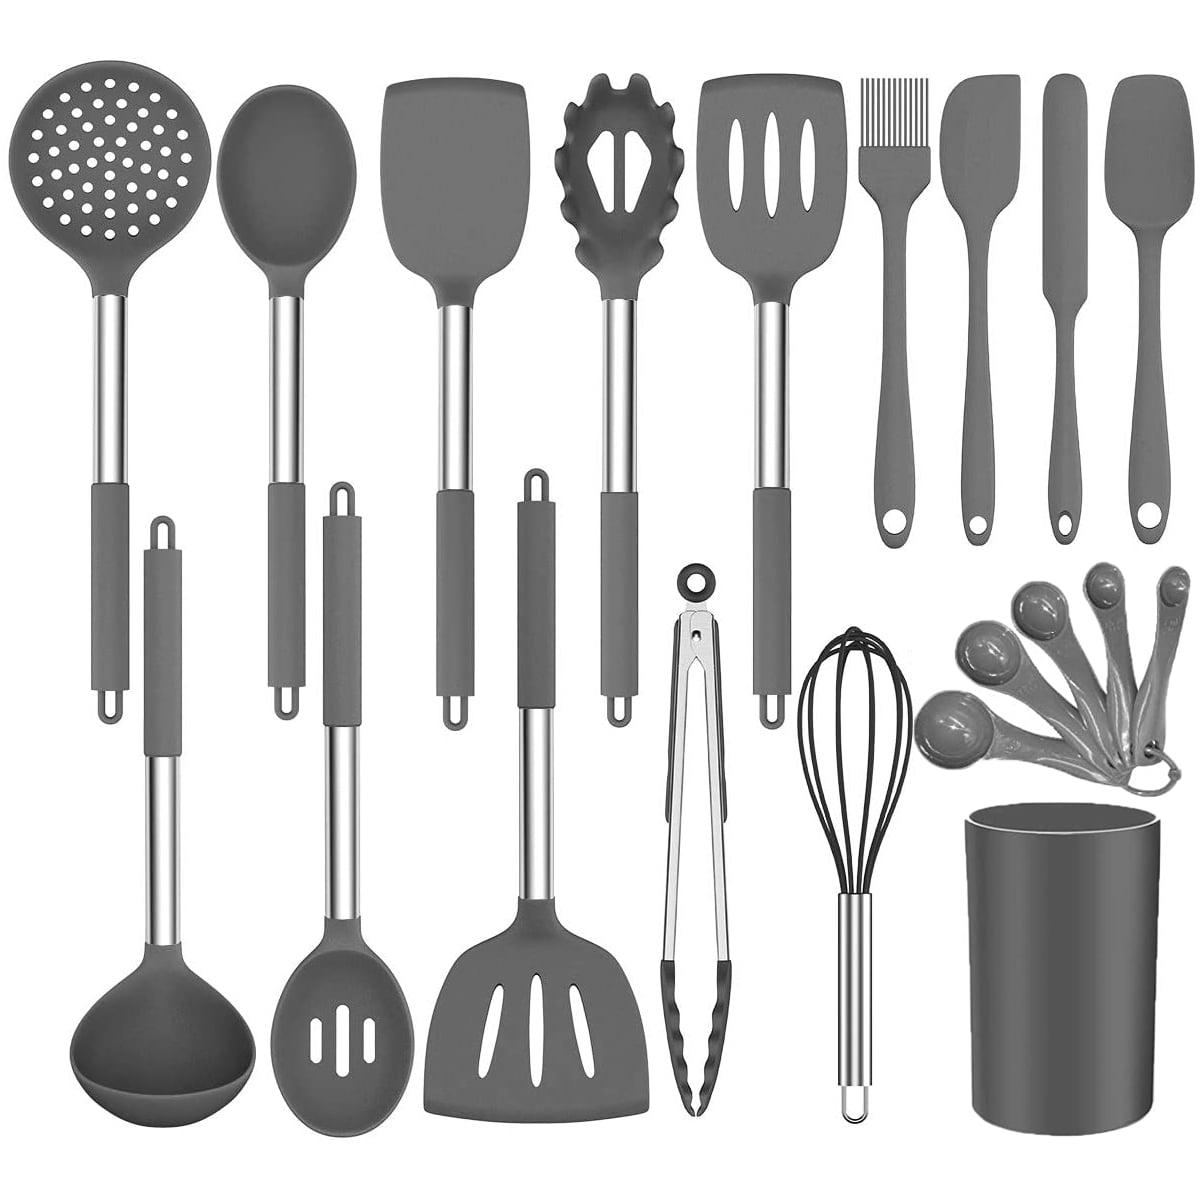 BPA Free, Non Toxic 446°F Heat Resistant Kitchen Utensils Cookware with Stainless Steel Handle Non-stick Cooking Utensils Set 30 Pcs Silicone Kitchen Utensils Set Silicone Cooking Utensil Set 